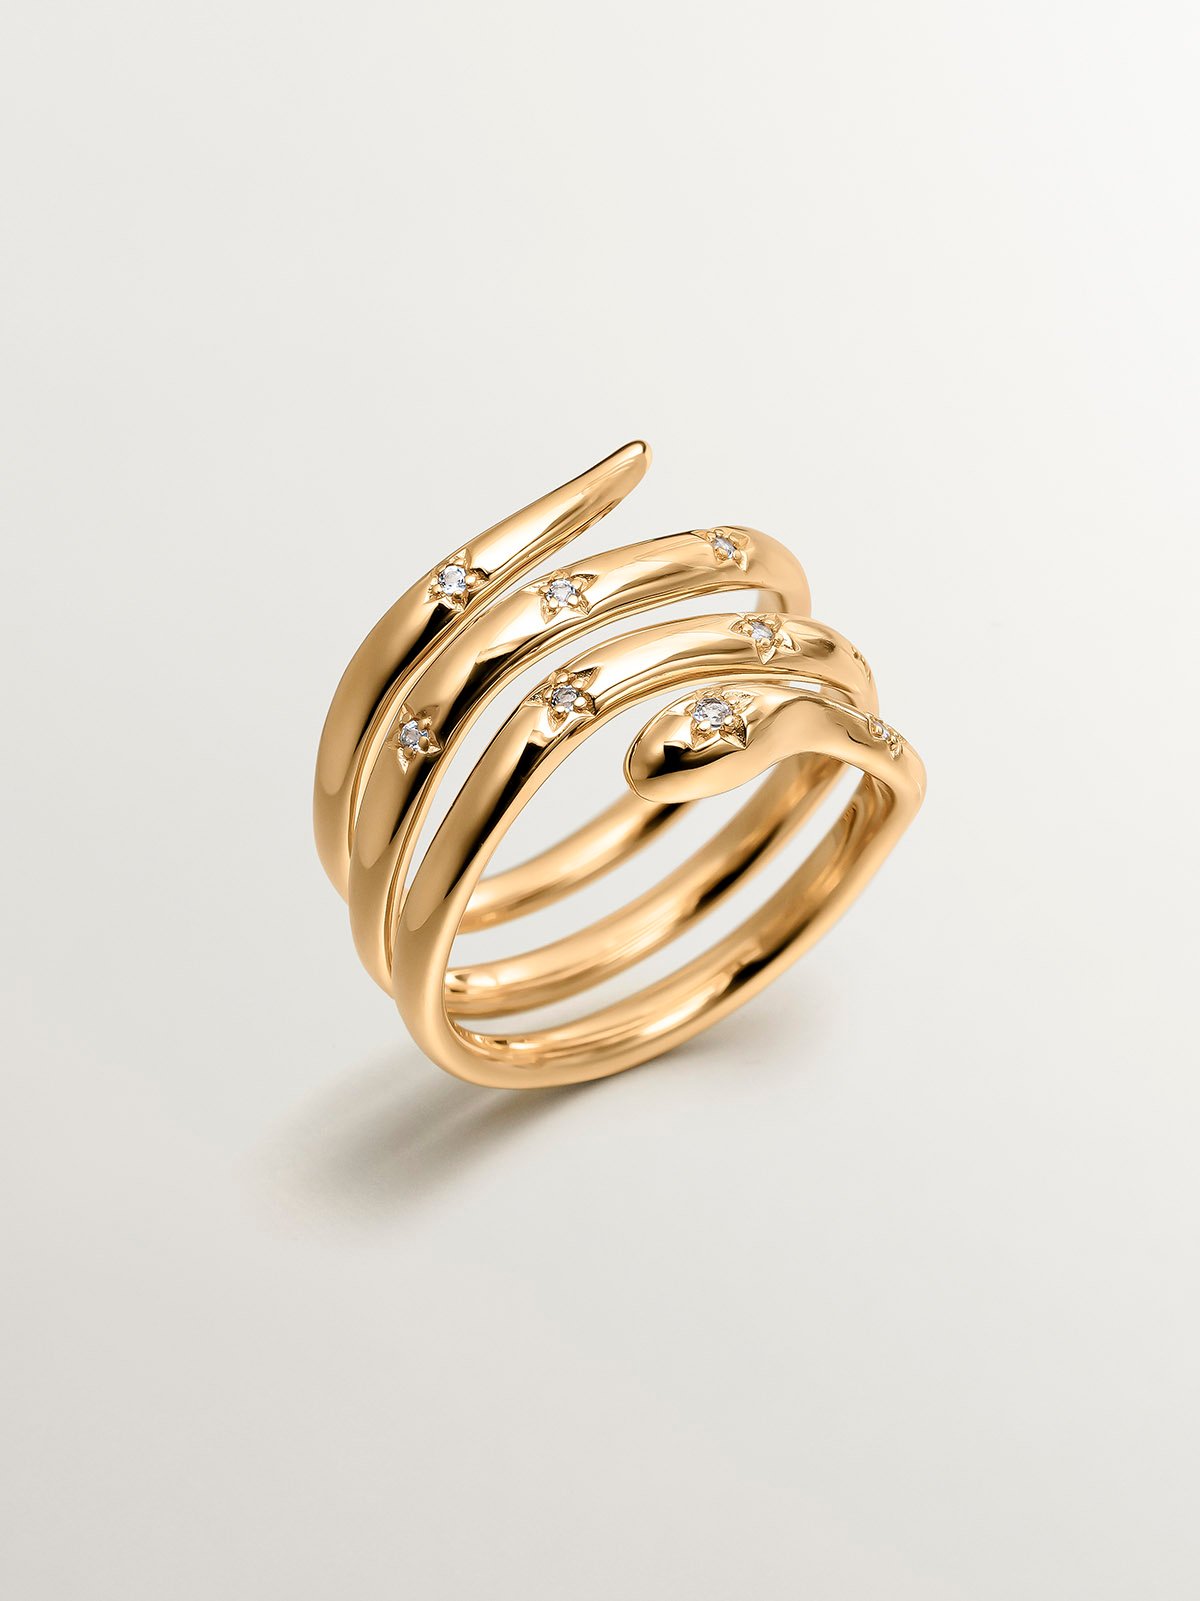 925 Silver triple ring bathed in 18K yellow gold with a snake shape and white topazes.